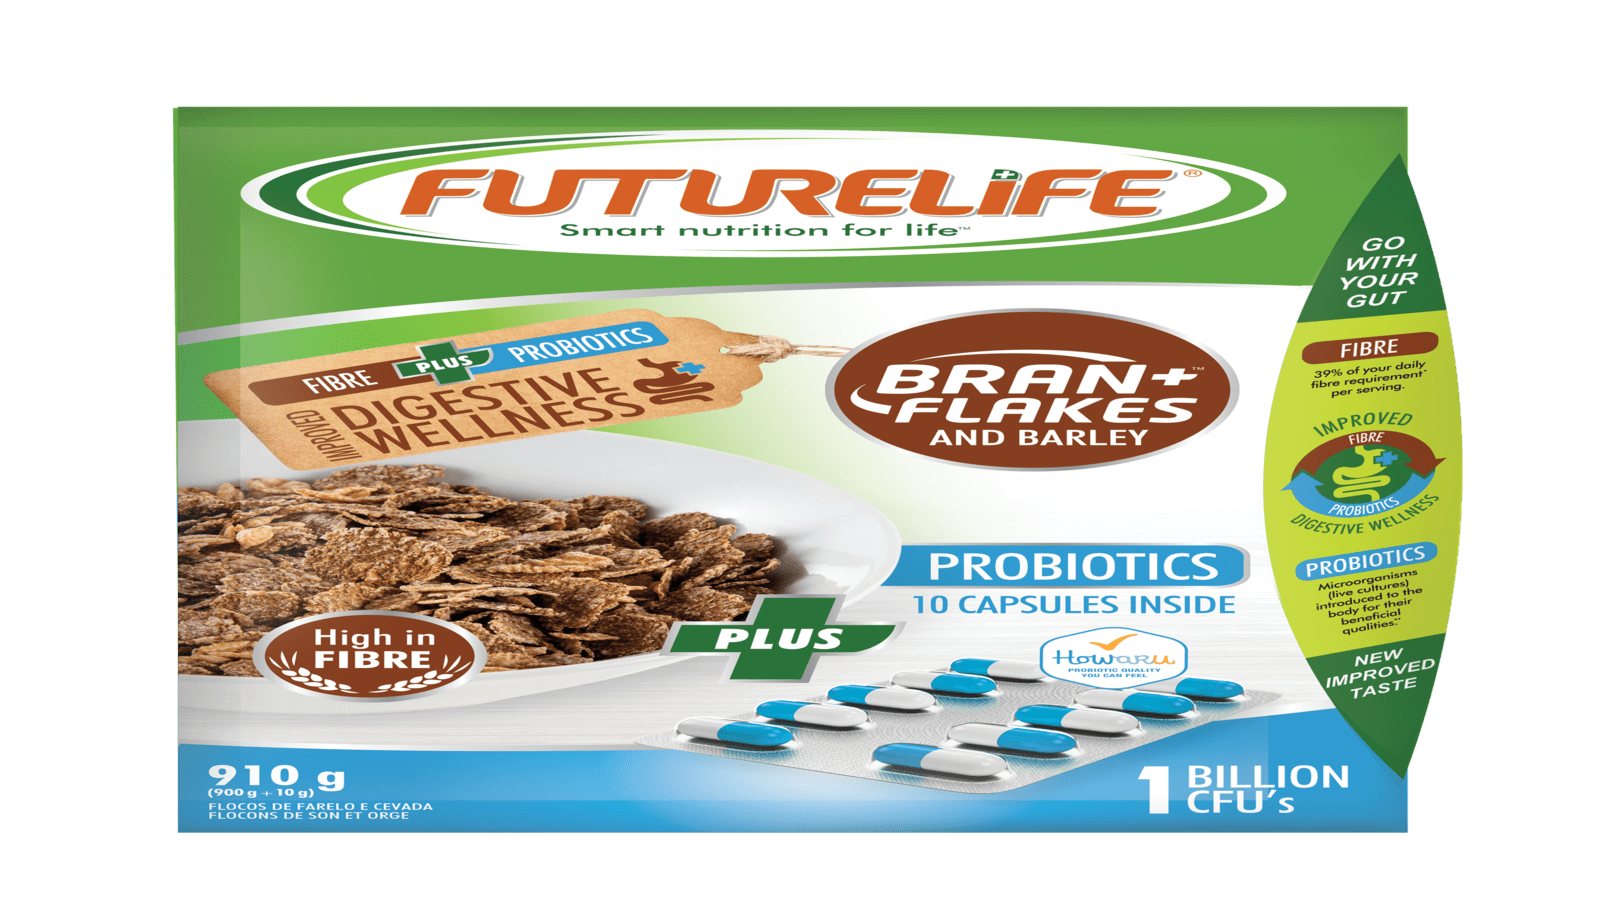 South African food brand FUTURELIFE launches breakfast cereals powered by probiotic capsules